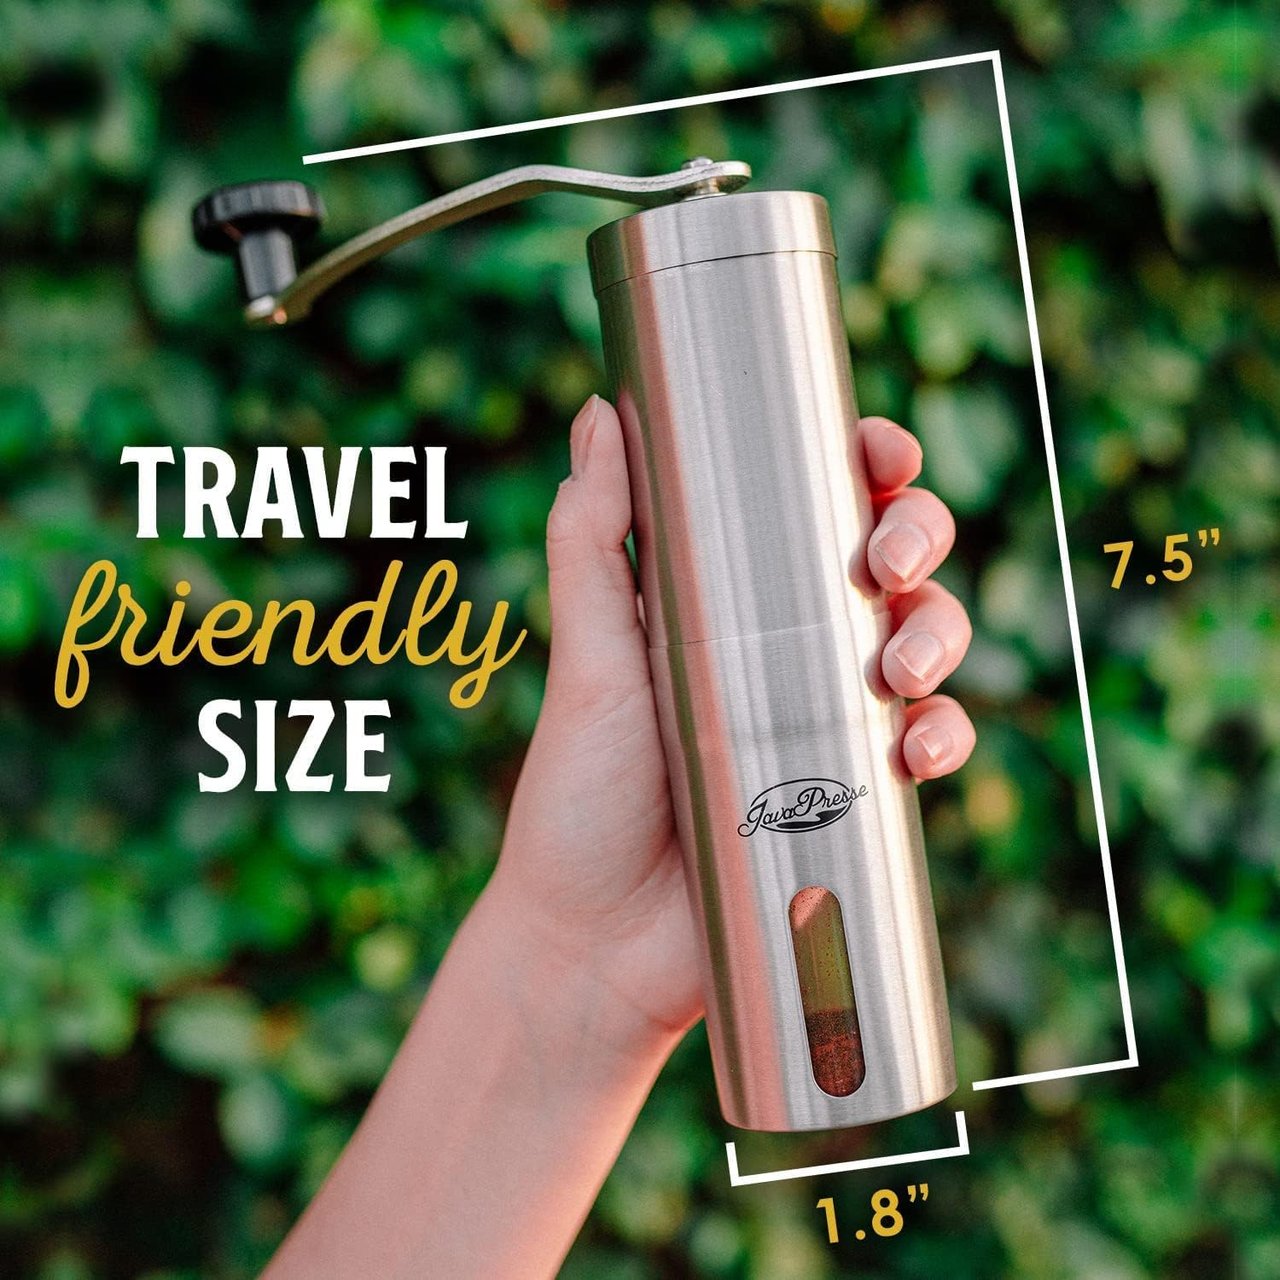 3 JavaPresse's Manual Coffee Grinder - Precision Coffee Bean Grinder with 18 Customizable Grind Levels, Premium Stainless Steel Manual Burr Coffee Grinder with Hand Crank - Exceptional Present, Ideal for Outdoor Adventures.